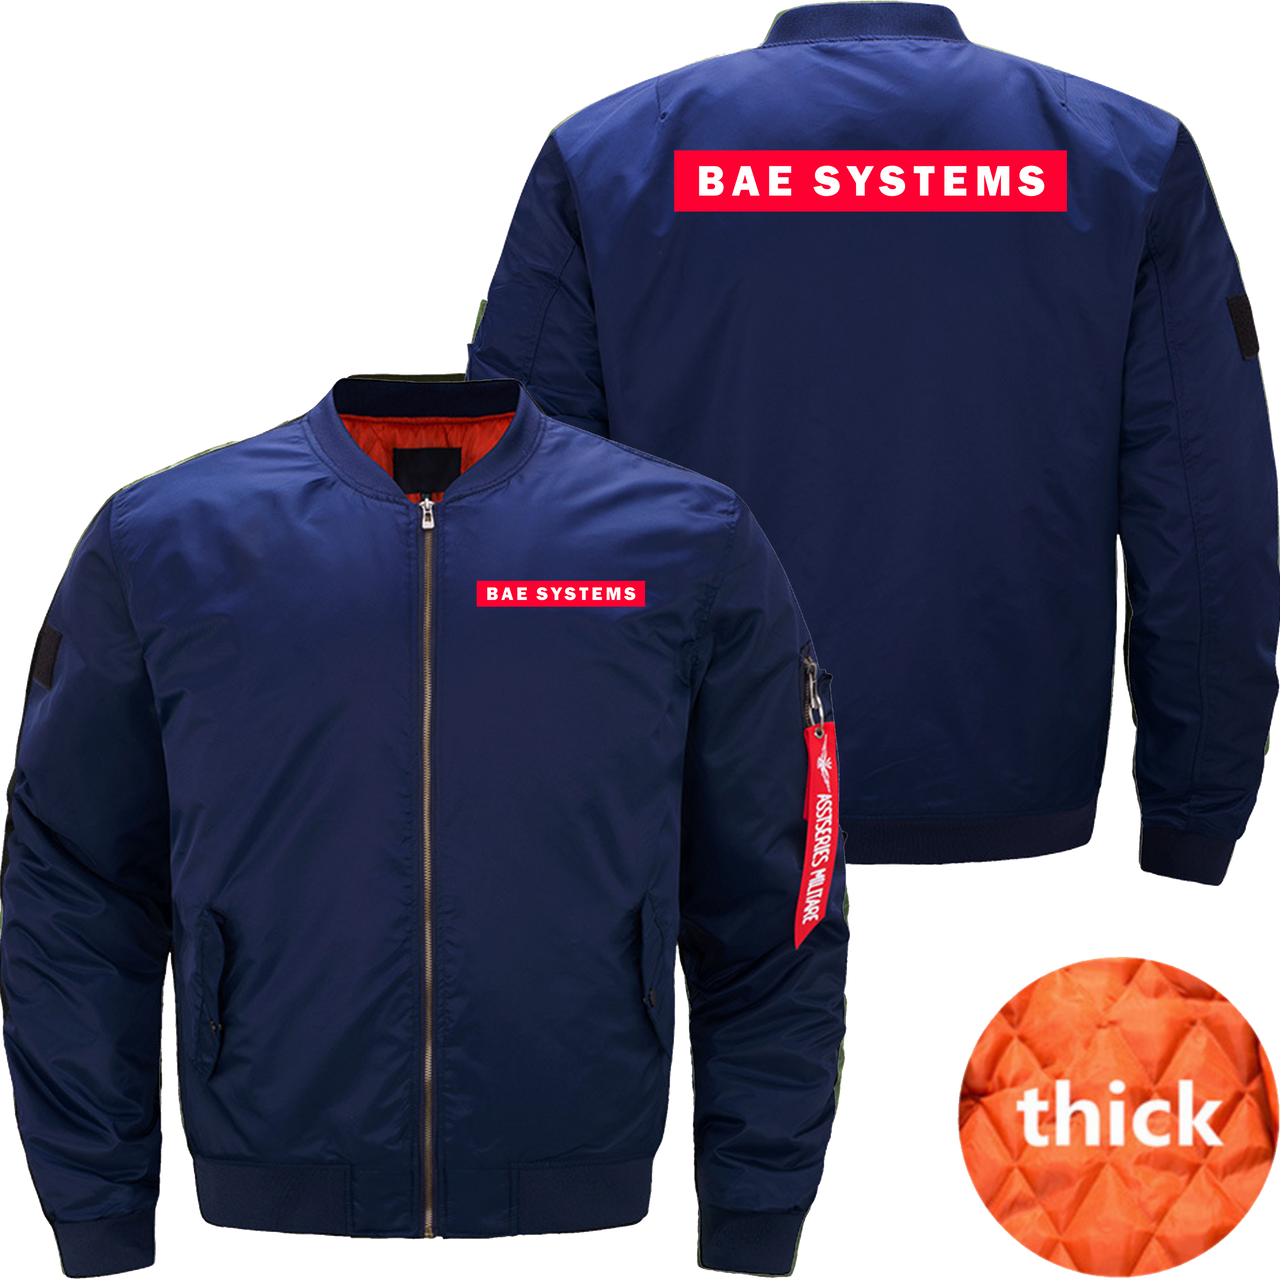 Bae systems Jacket